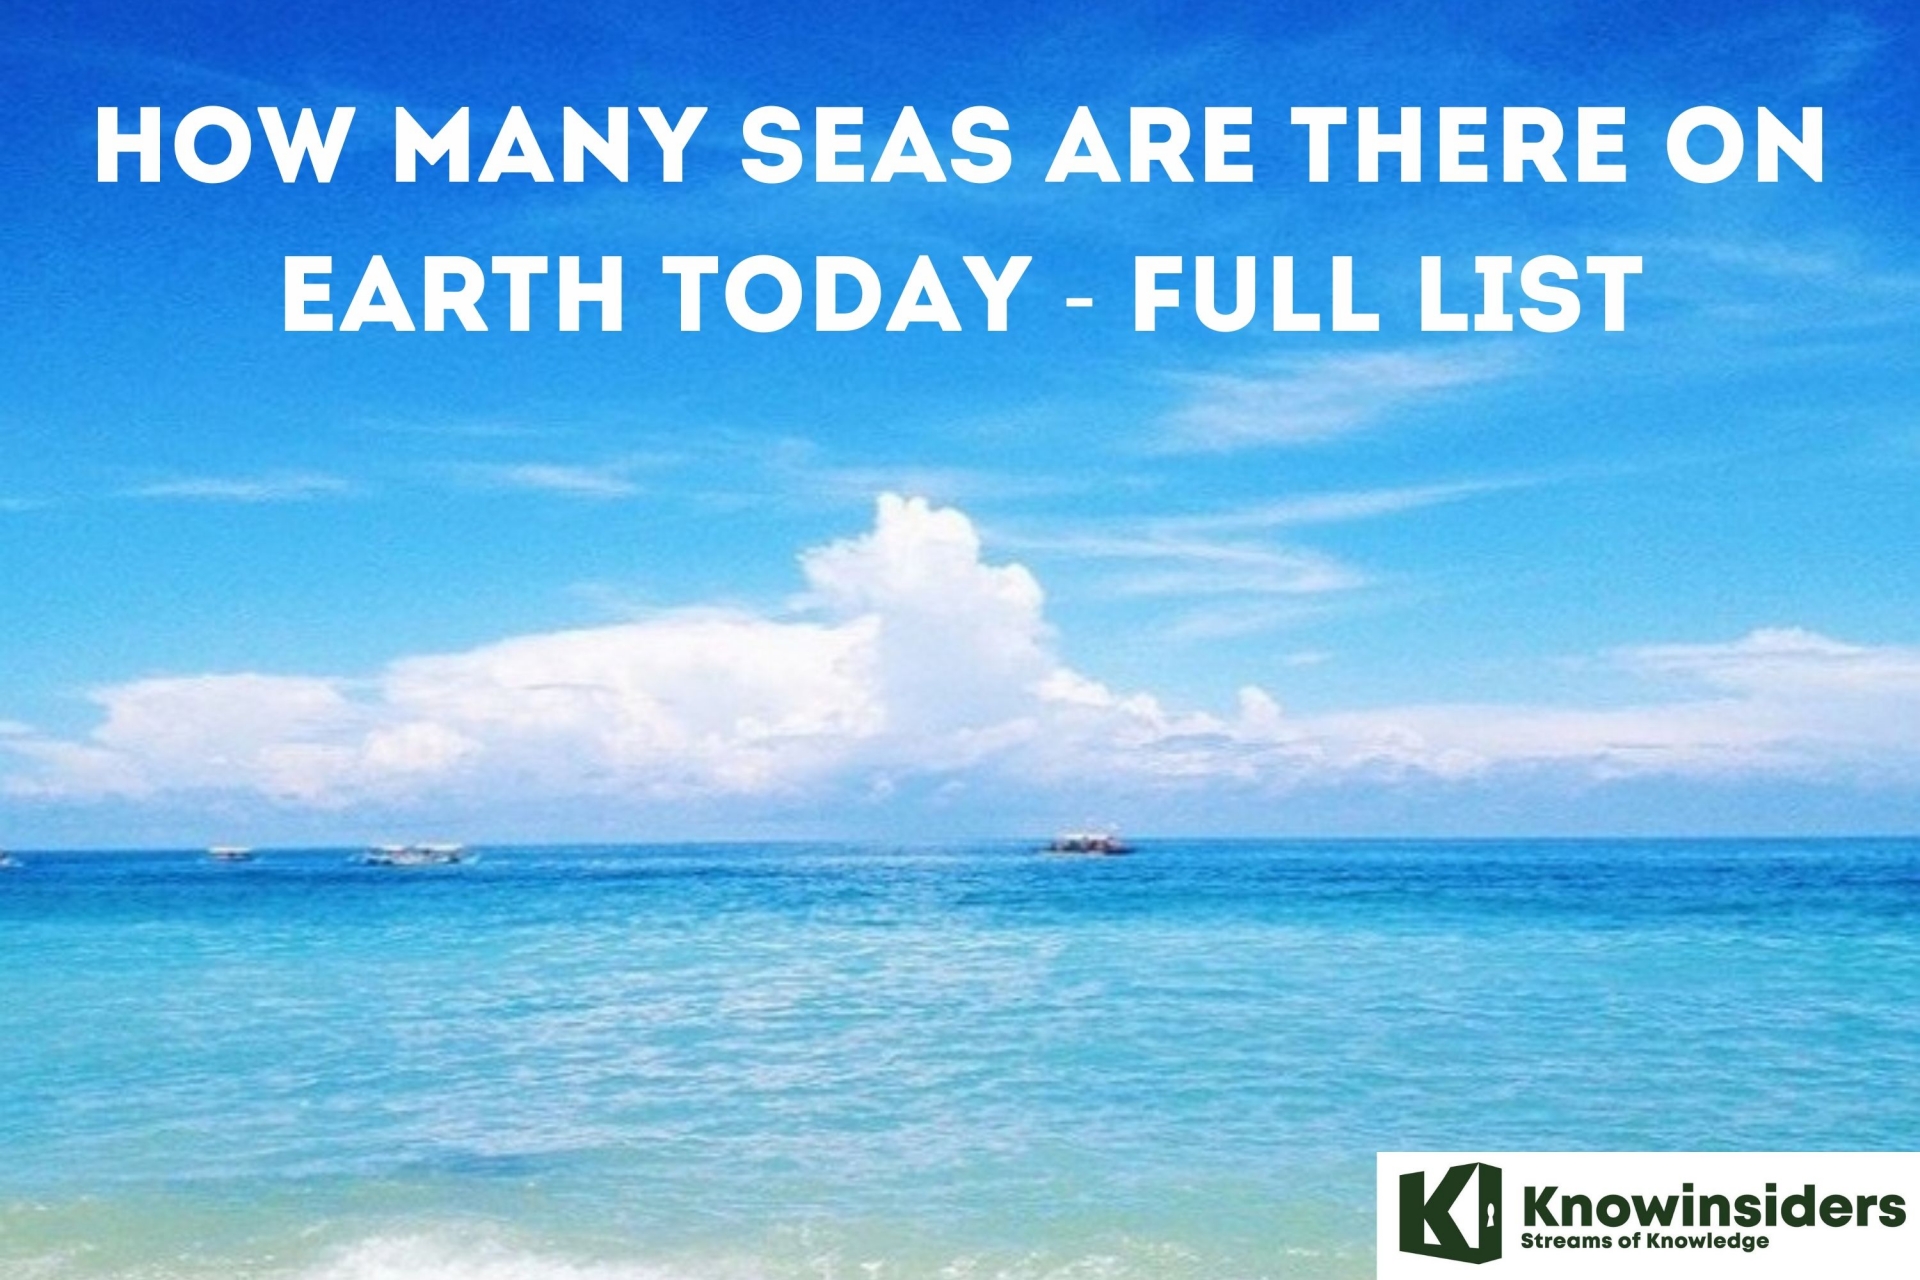 How Many Seas Are There on Earth Today - Full List